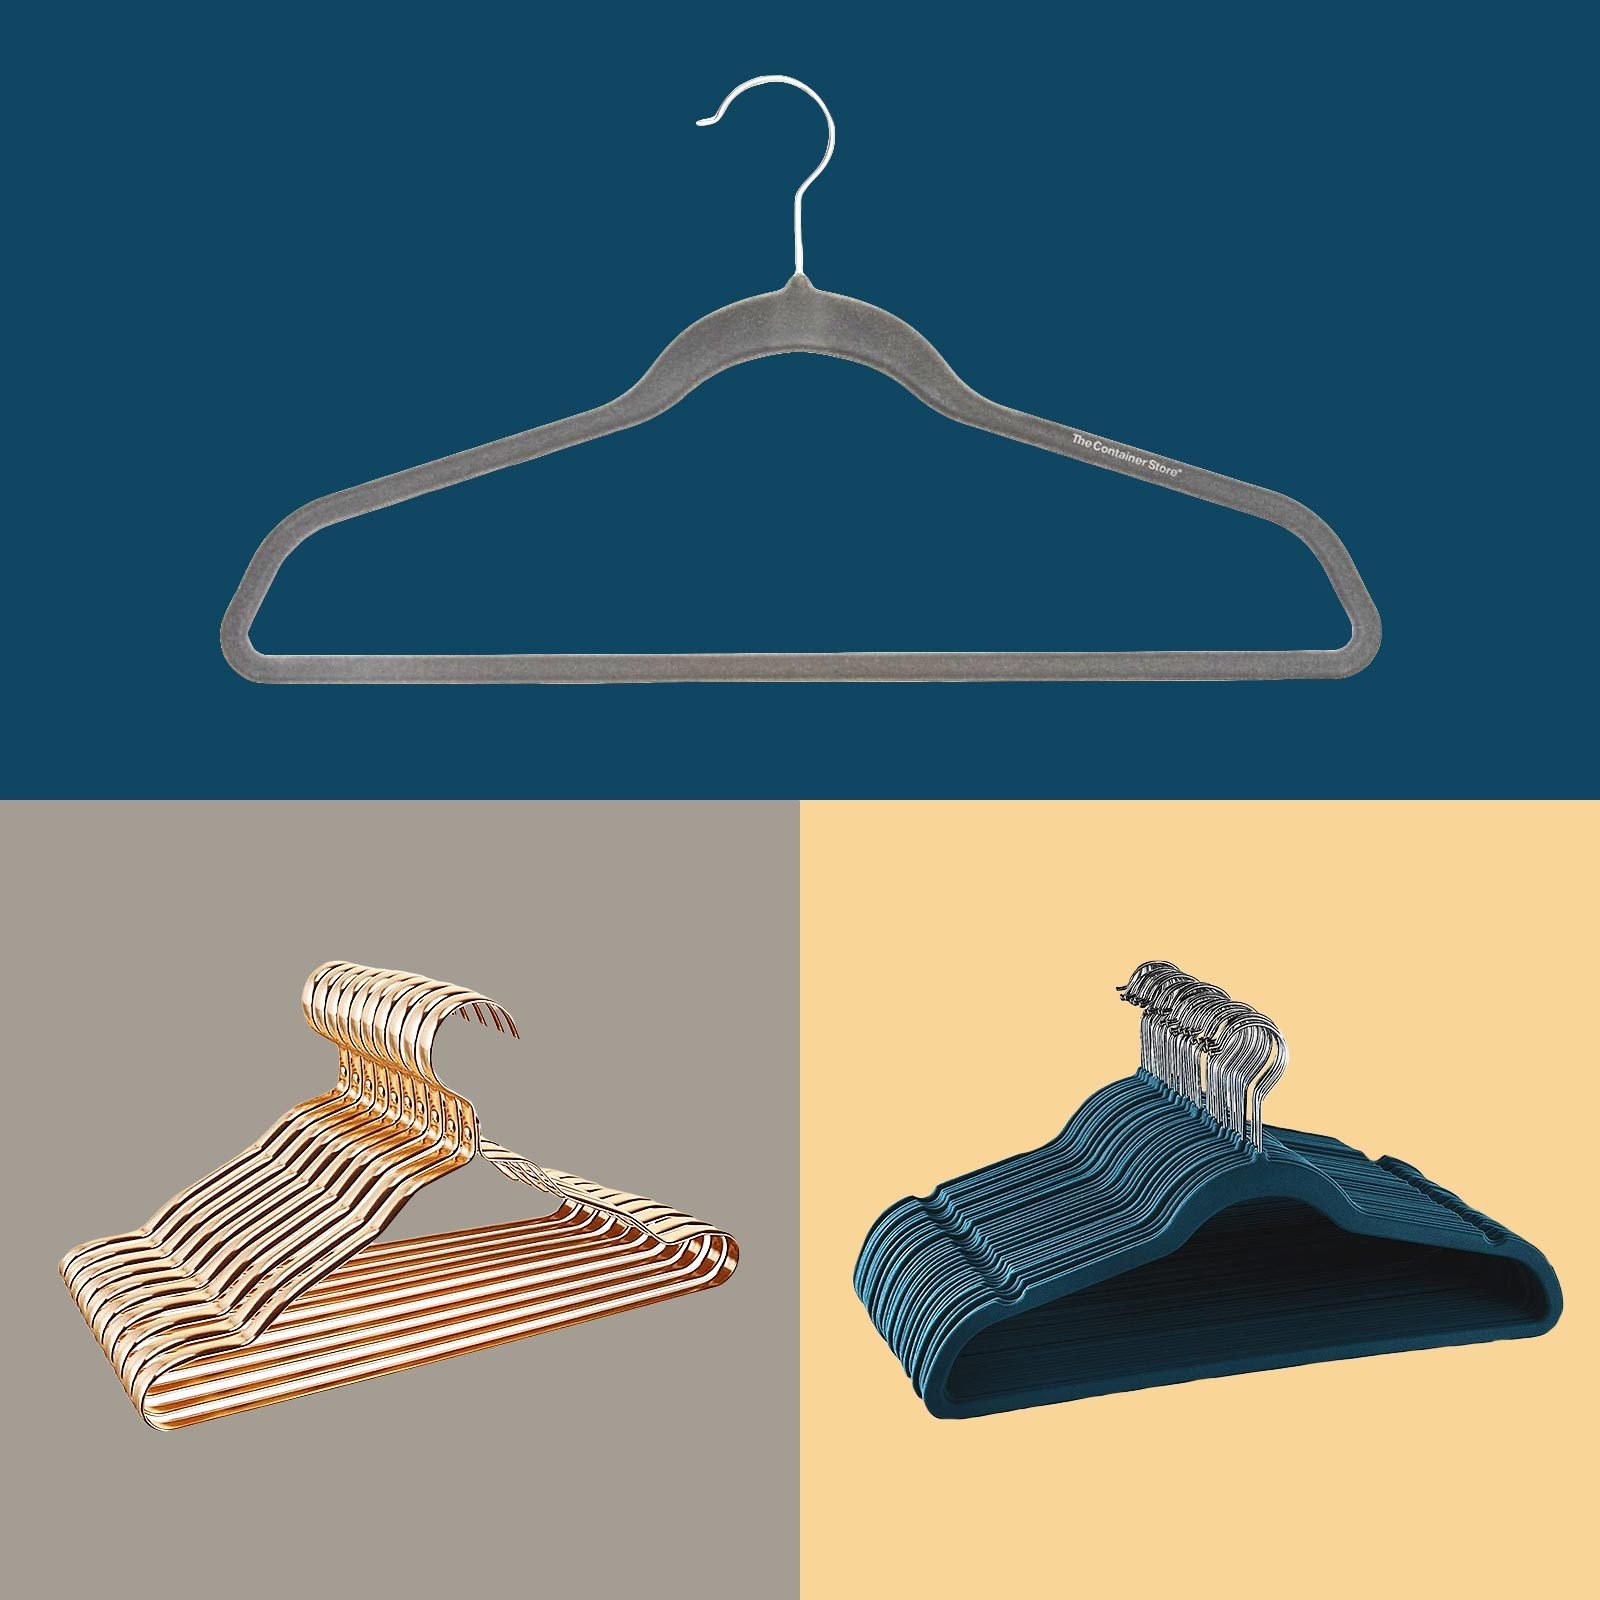 https://www.rd.com/wp-content/uploads/2021/04/RD-ecomm-FT-9-Best-Space-Saving-Hangers-to-Make-More-Room-in-Your-Closet-via-merchant-3.jpg